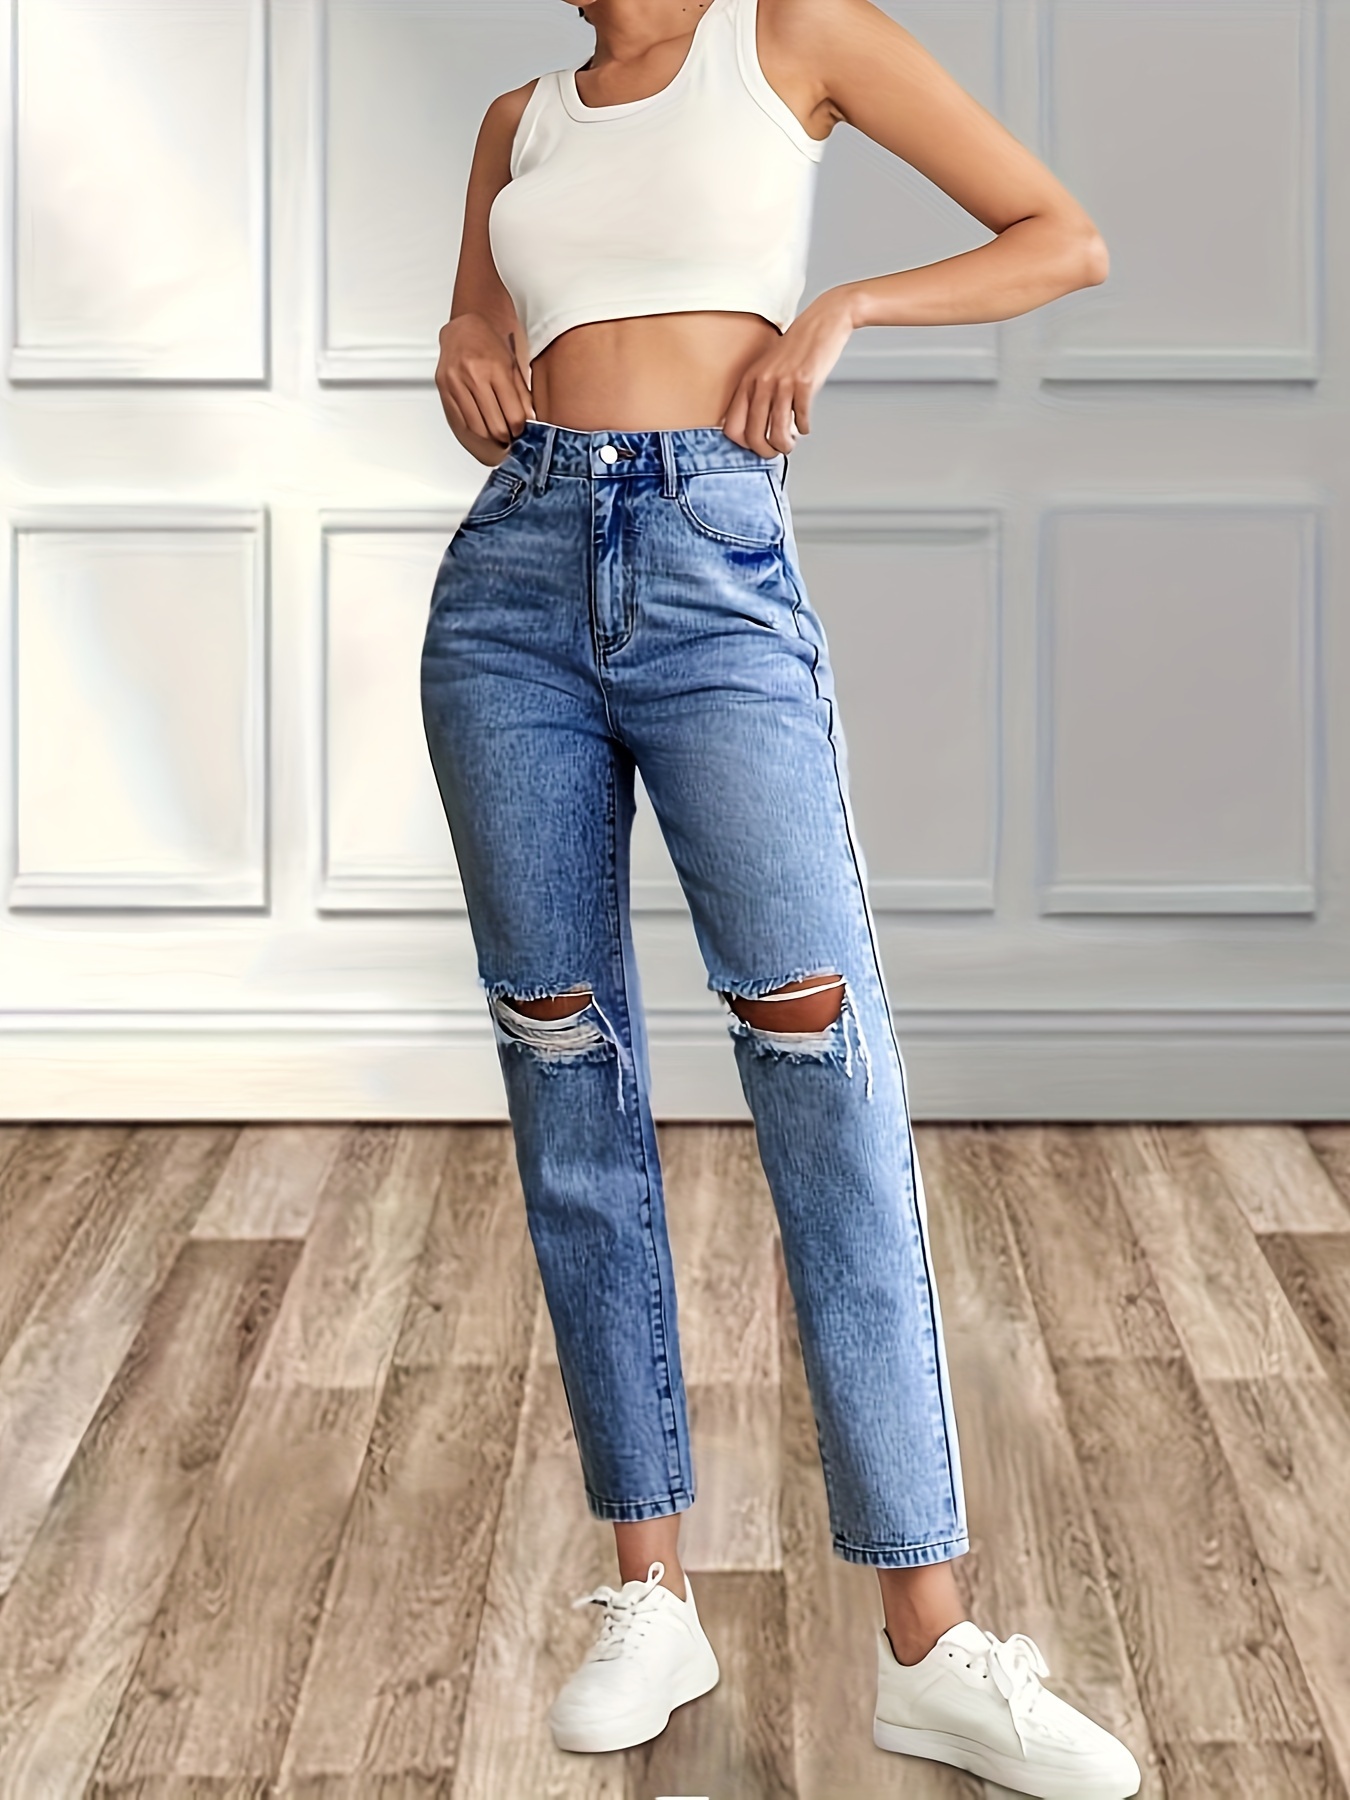 Women's Tapered Pants & Women's Tapered Jeans